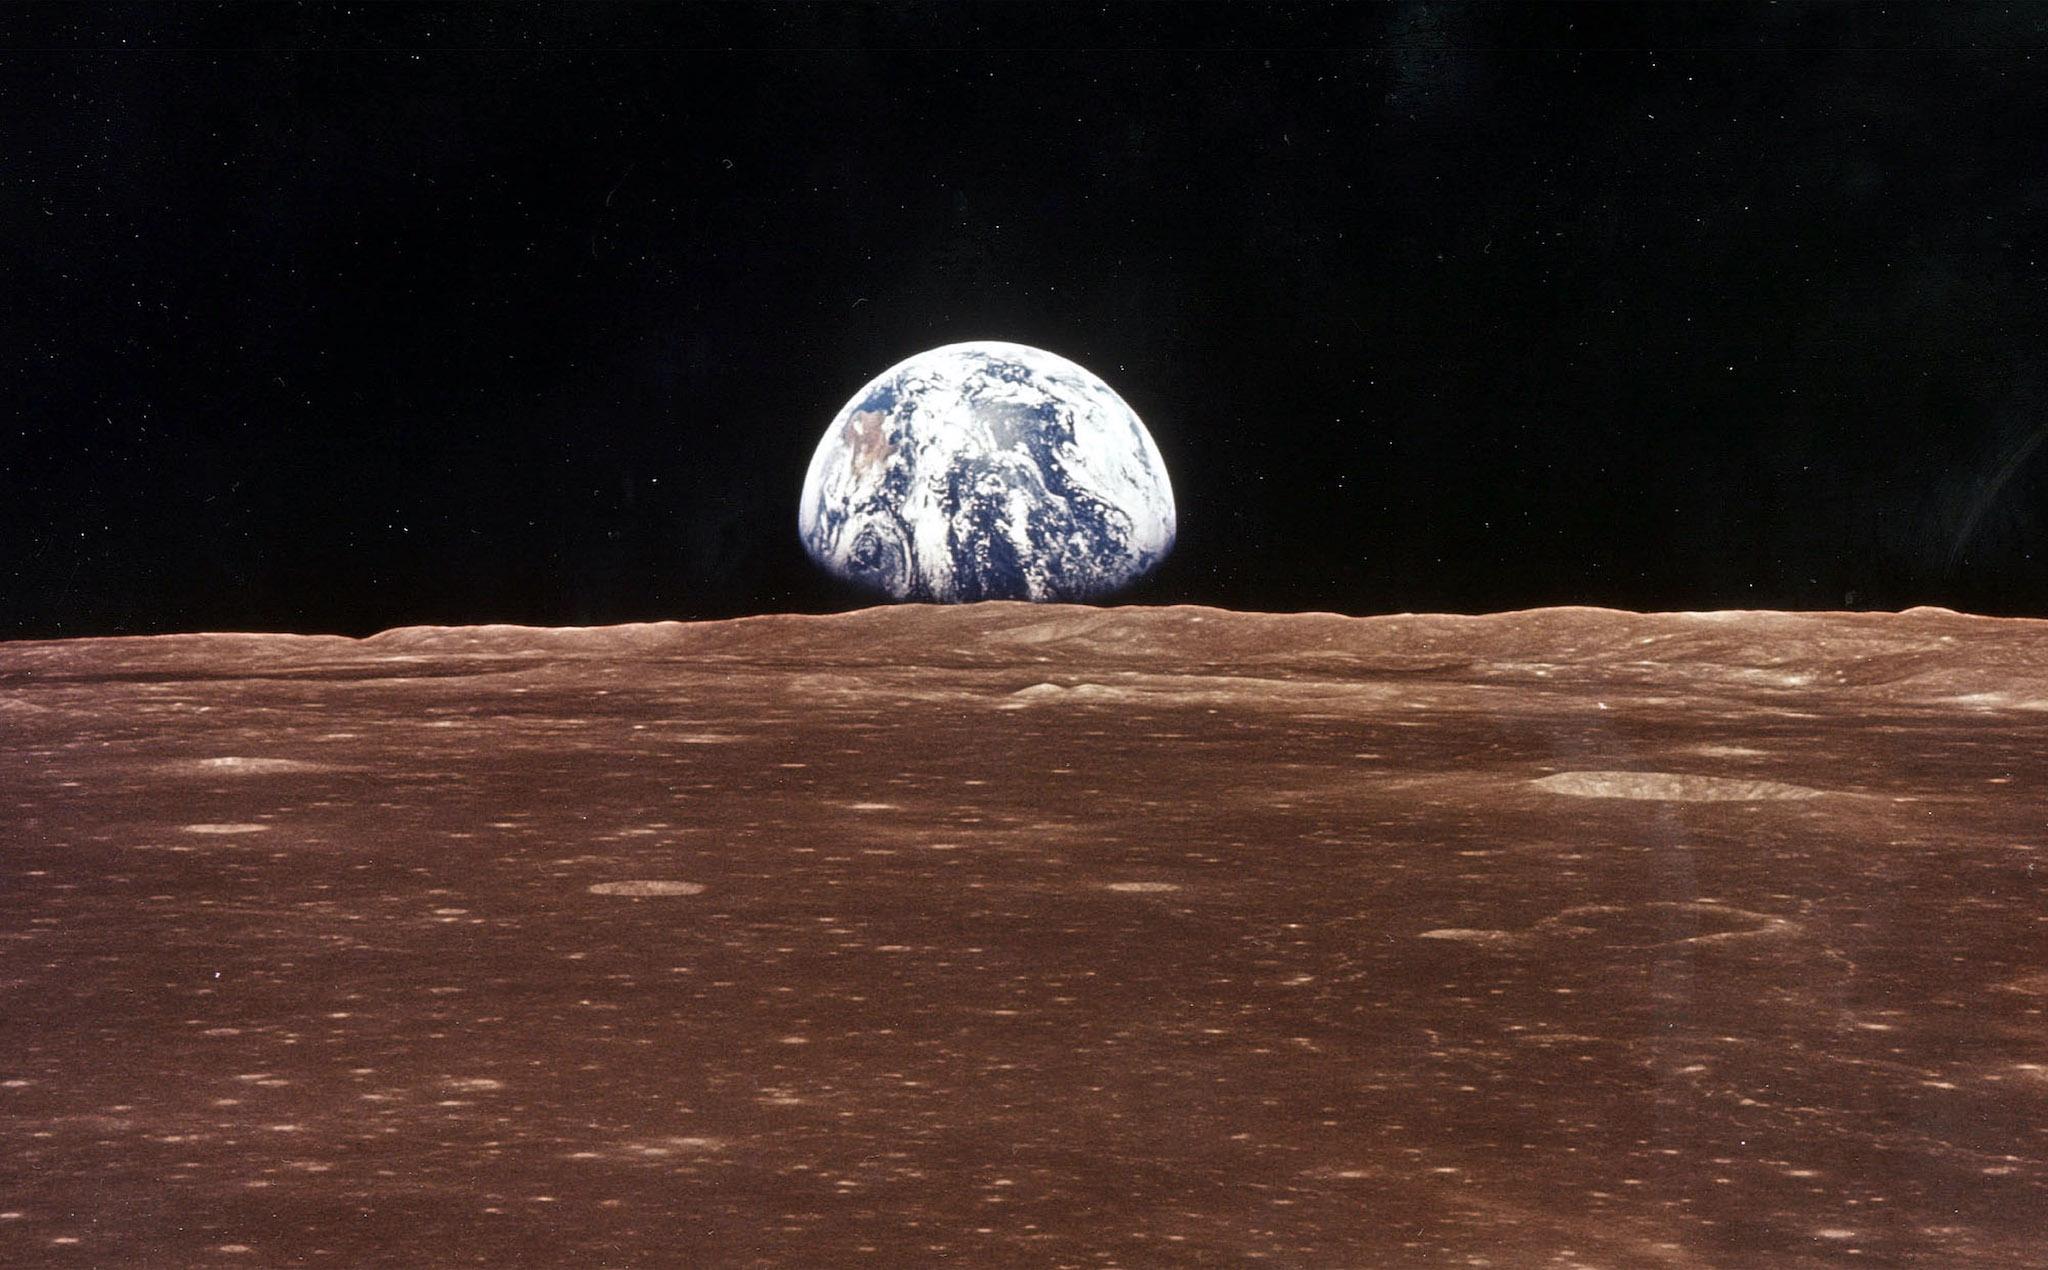 A view of the Earth appears over the Lunar horizon as the Apollo 11 Command Module comes into view of the Moon